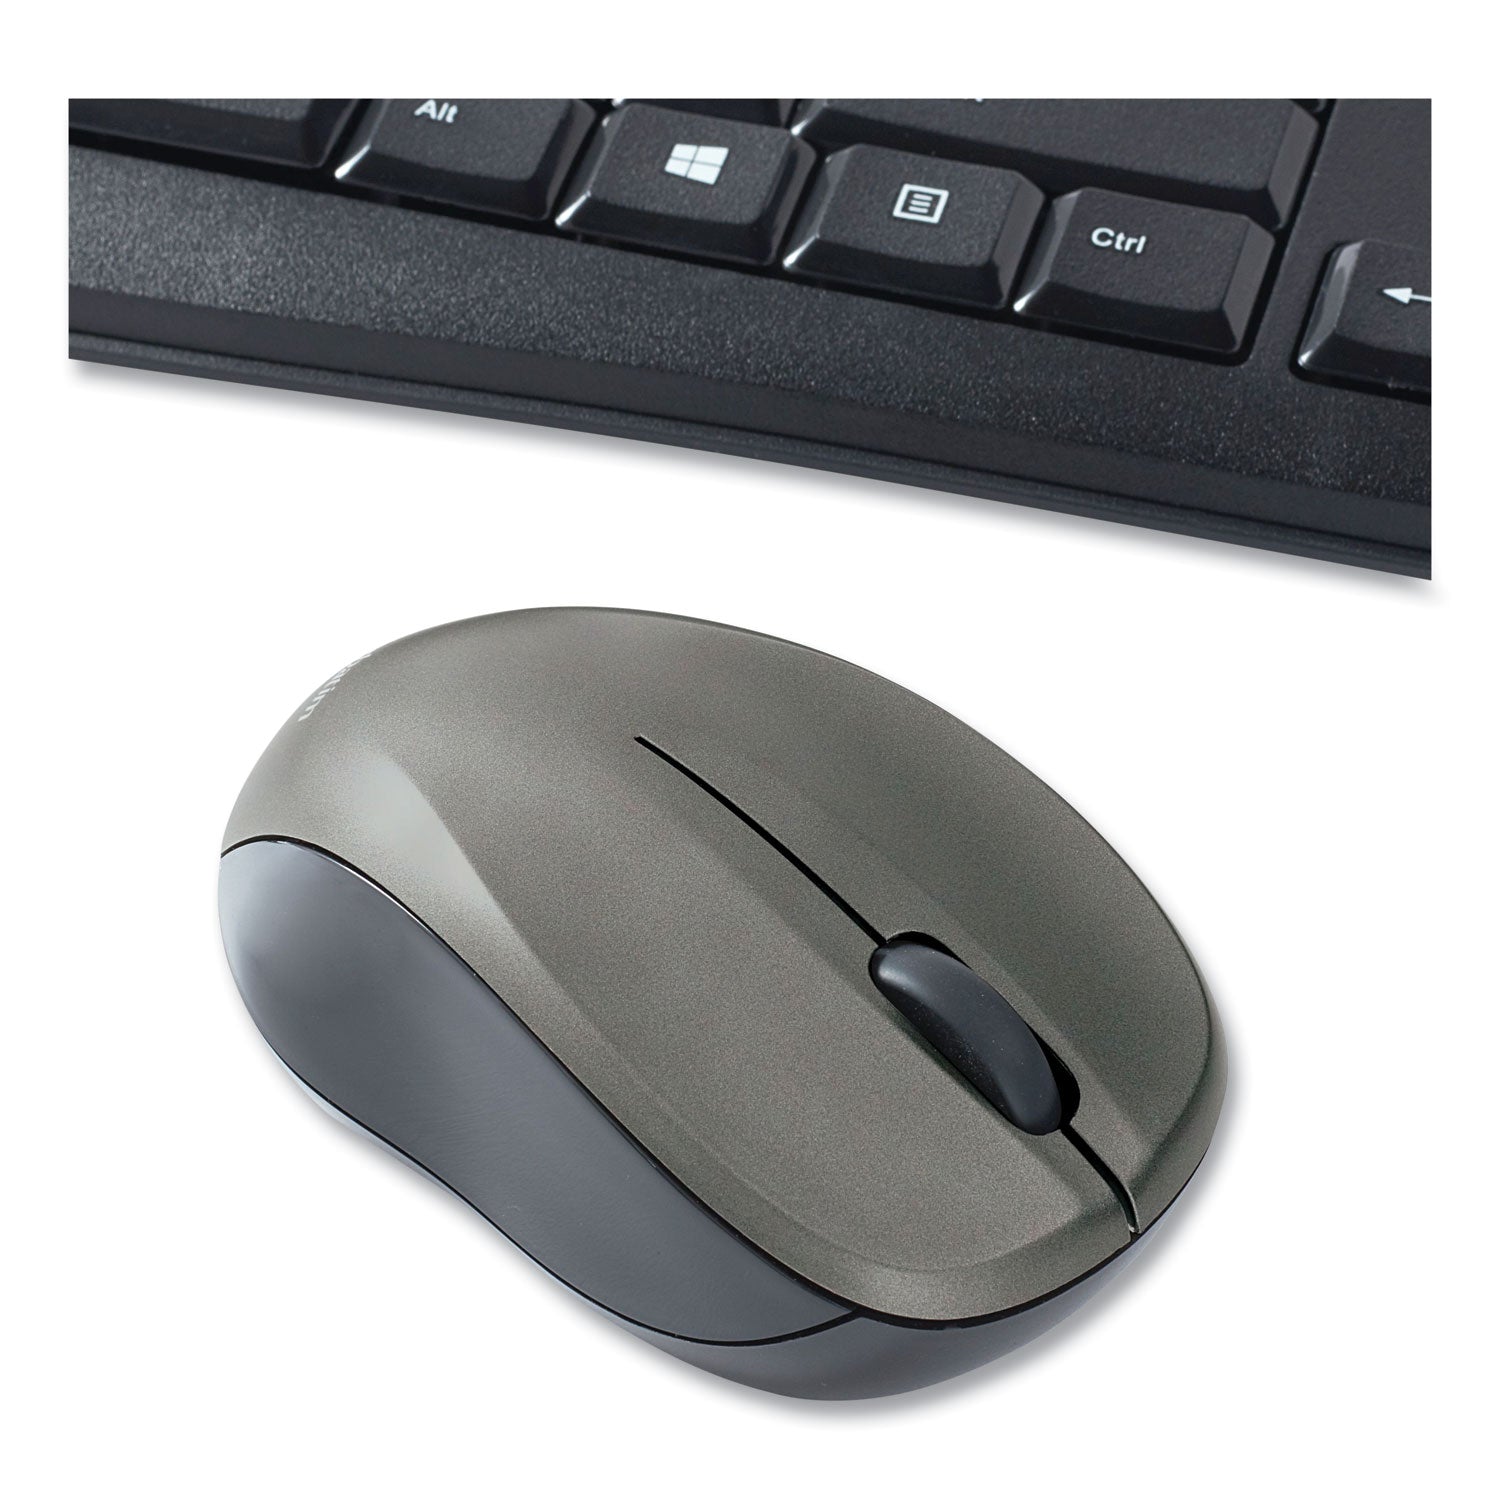 silent-wireless-mouse-and-keyboard-24-ghz-frequency-328-ft-wireless-range-black_ver99779 - 3